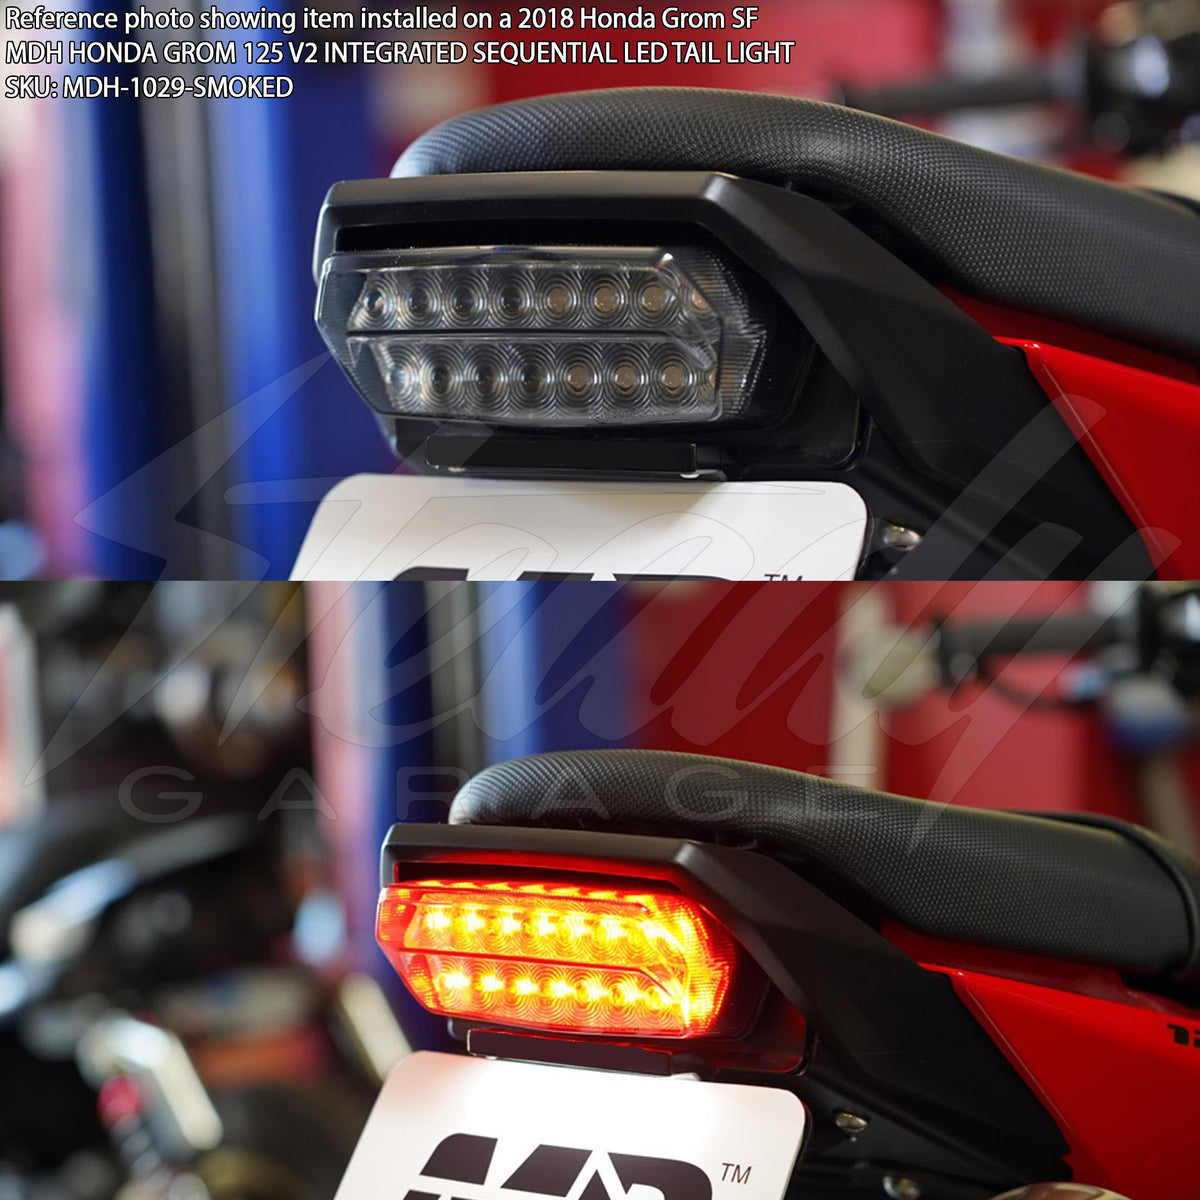 maat Kraan Of anders MDH Honda Grom 125 V2 Integrated Sequential LED Tail Light – Steady Garage